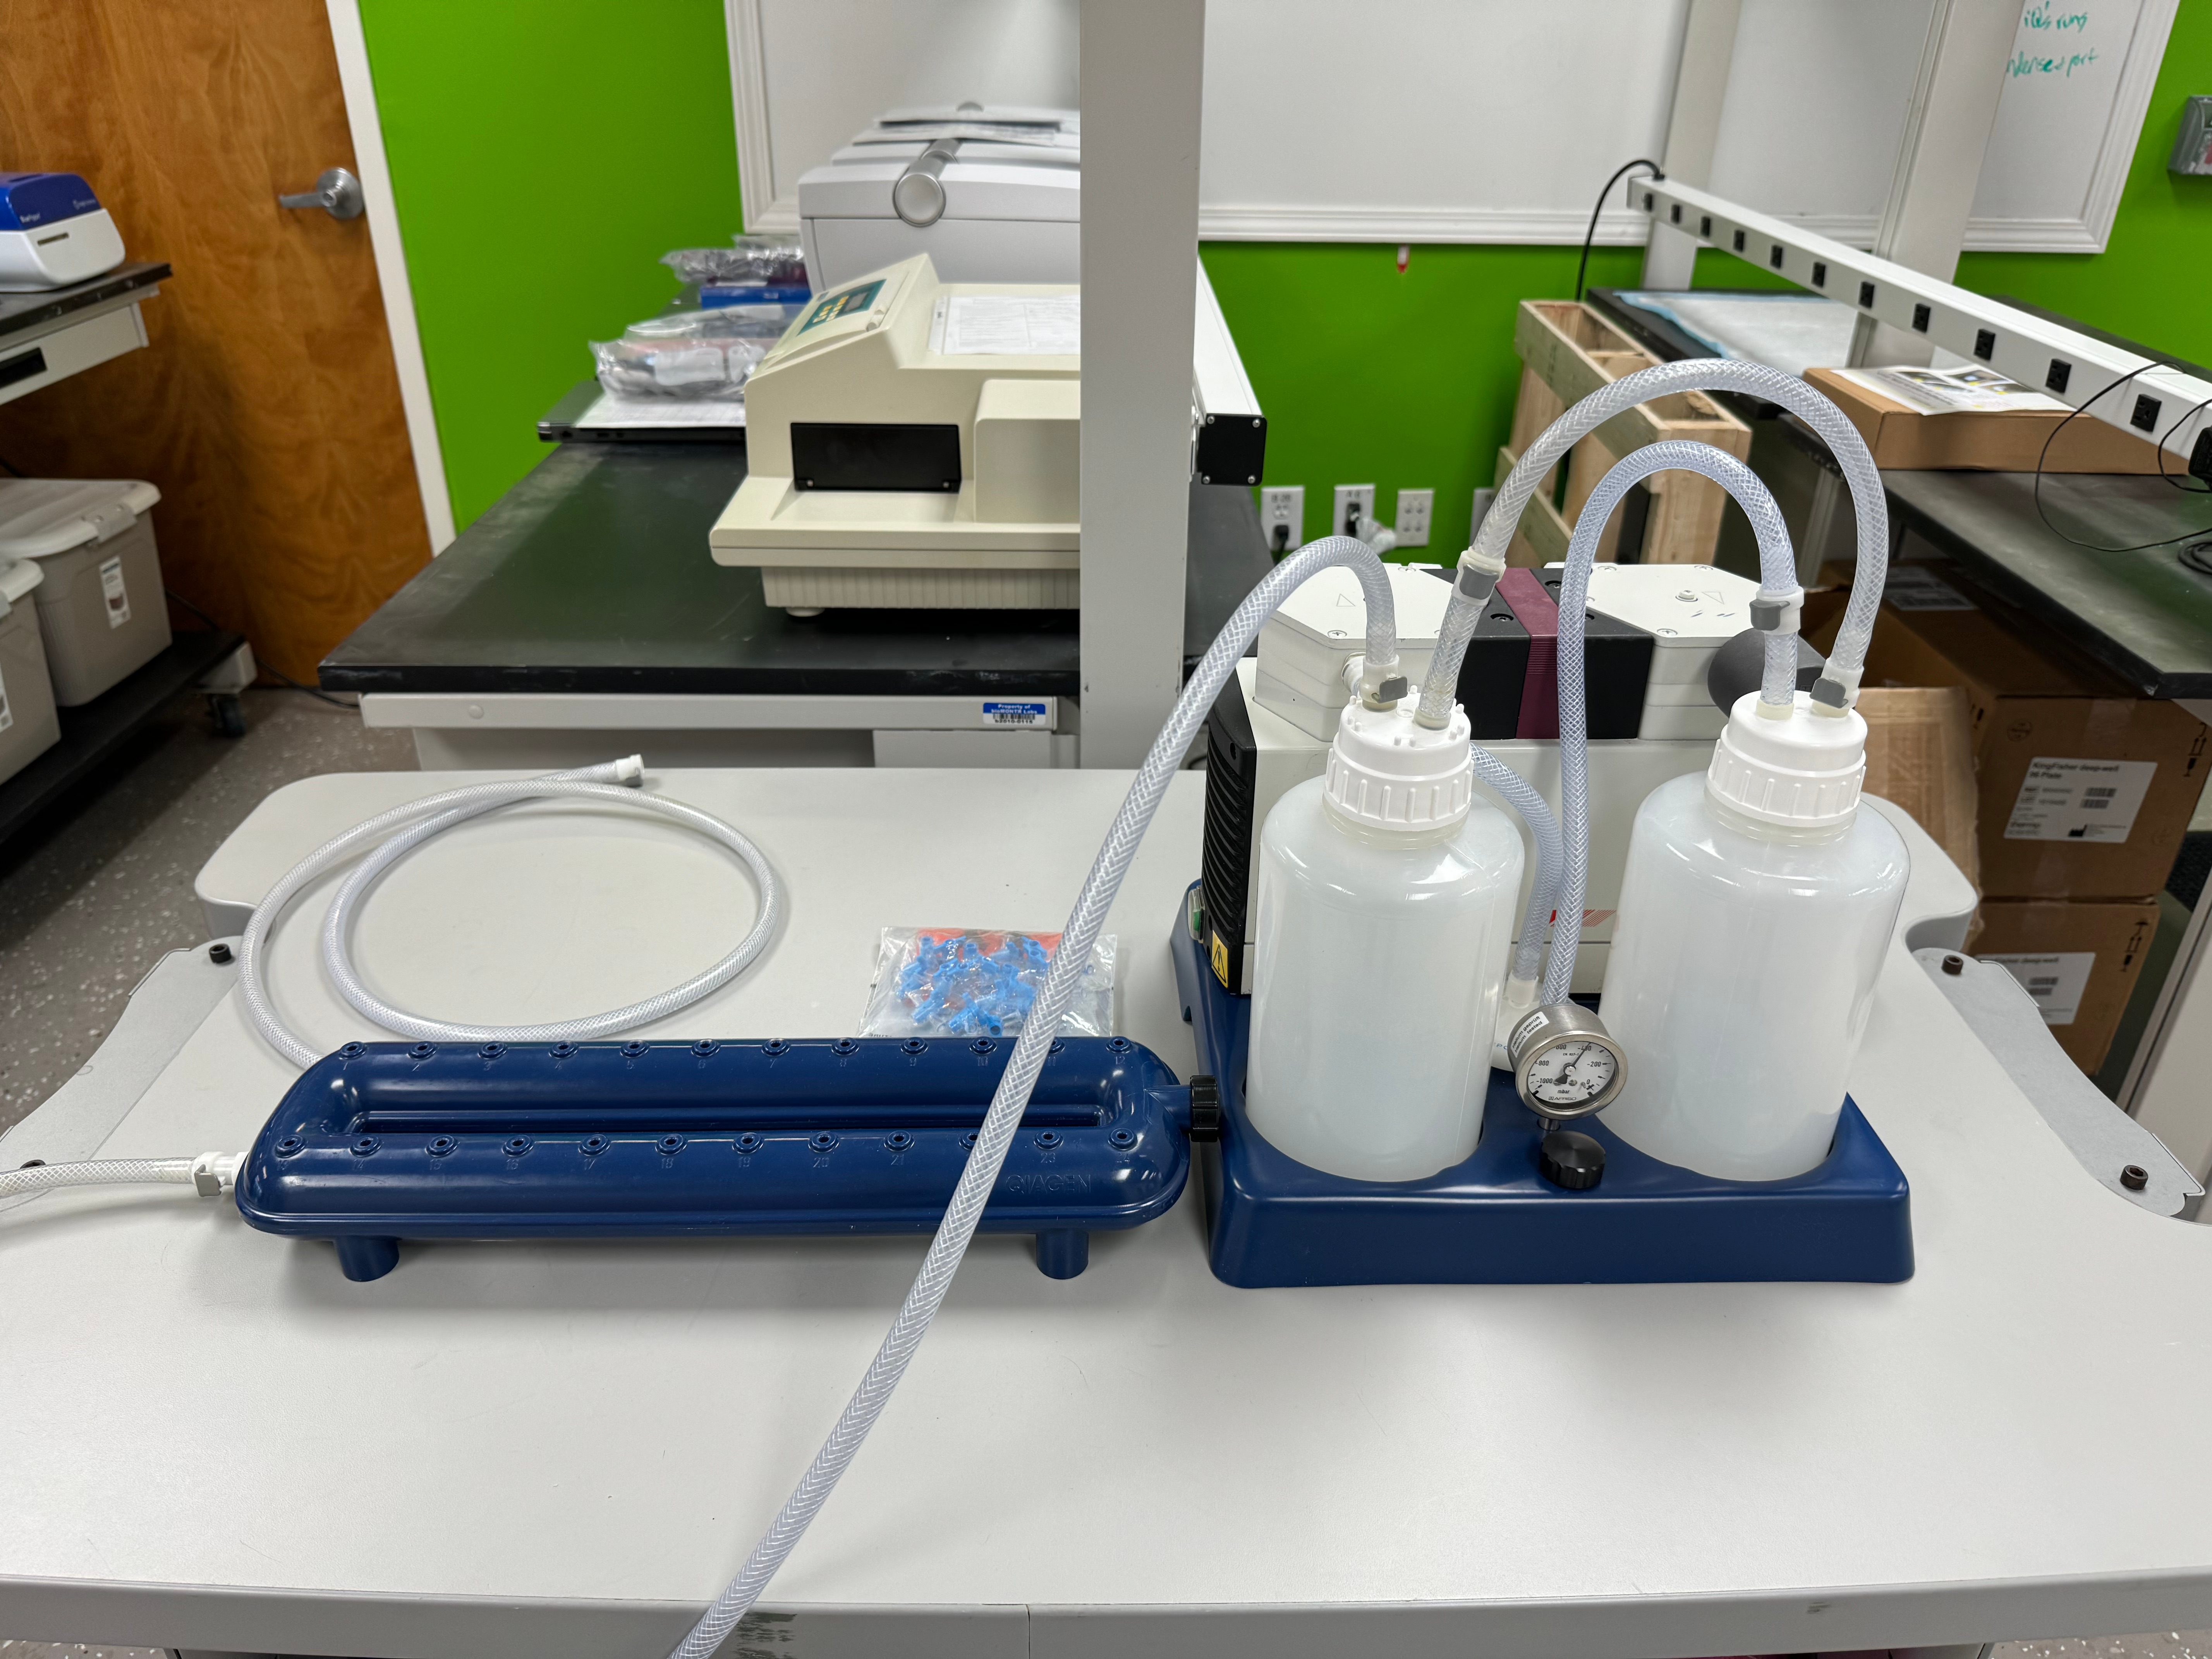 QIAGEN Qiavac PLus 24 Vacuum System- Great for Plasmid Purification and Operates per Factory OEM Specifications